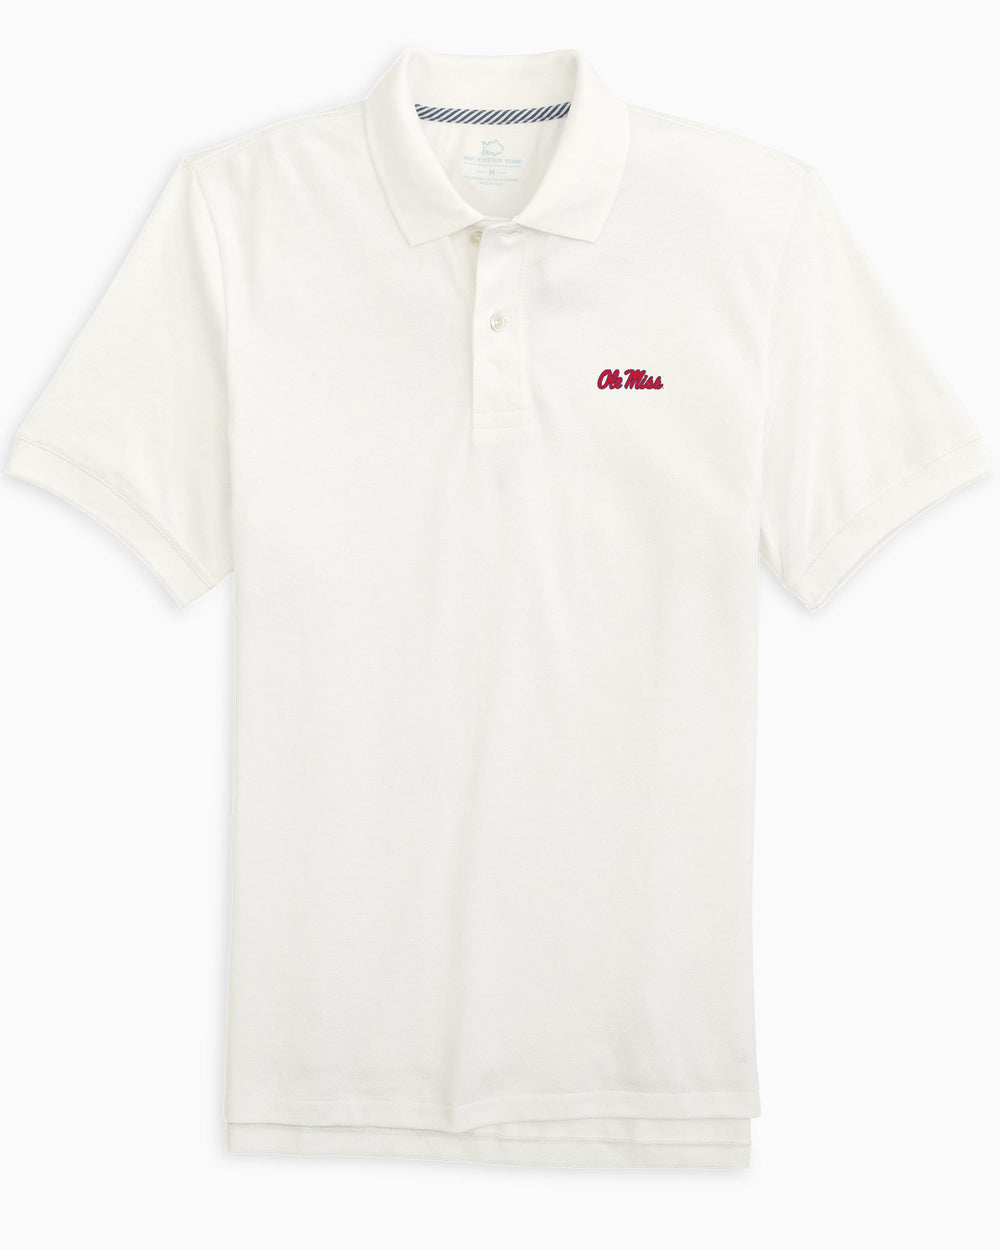 The front view of the Ole Miss New Short Sleeve Skipjack Polo by Southern Tide - Classic White